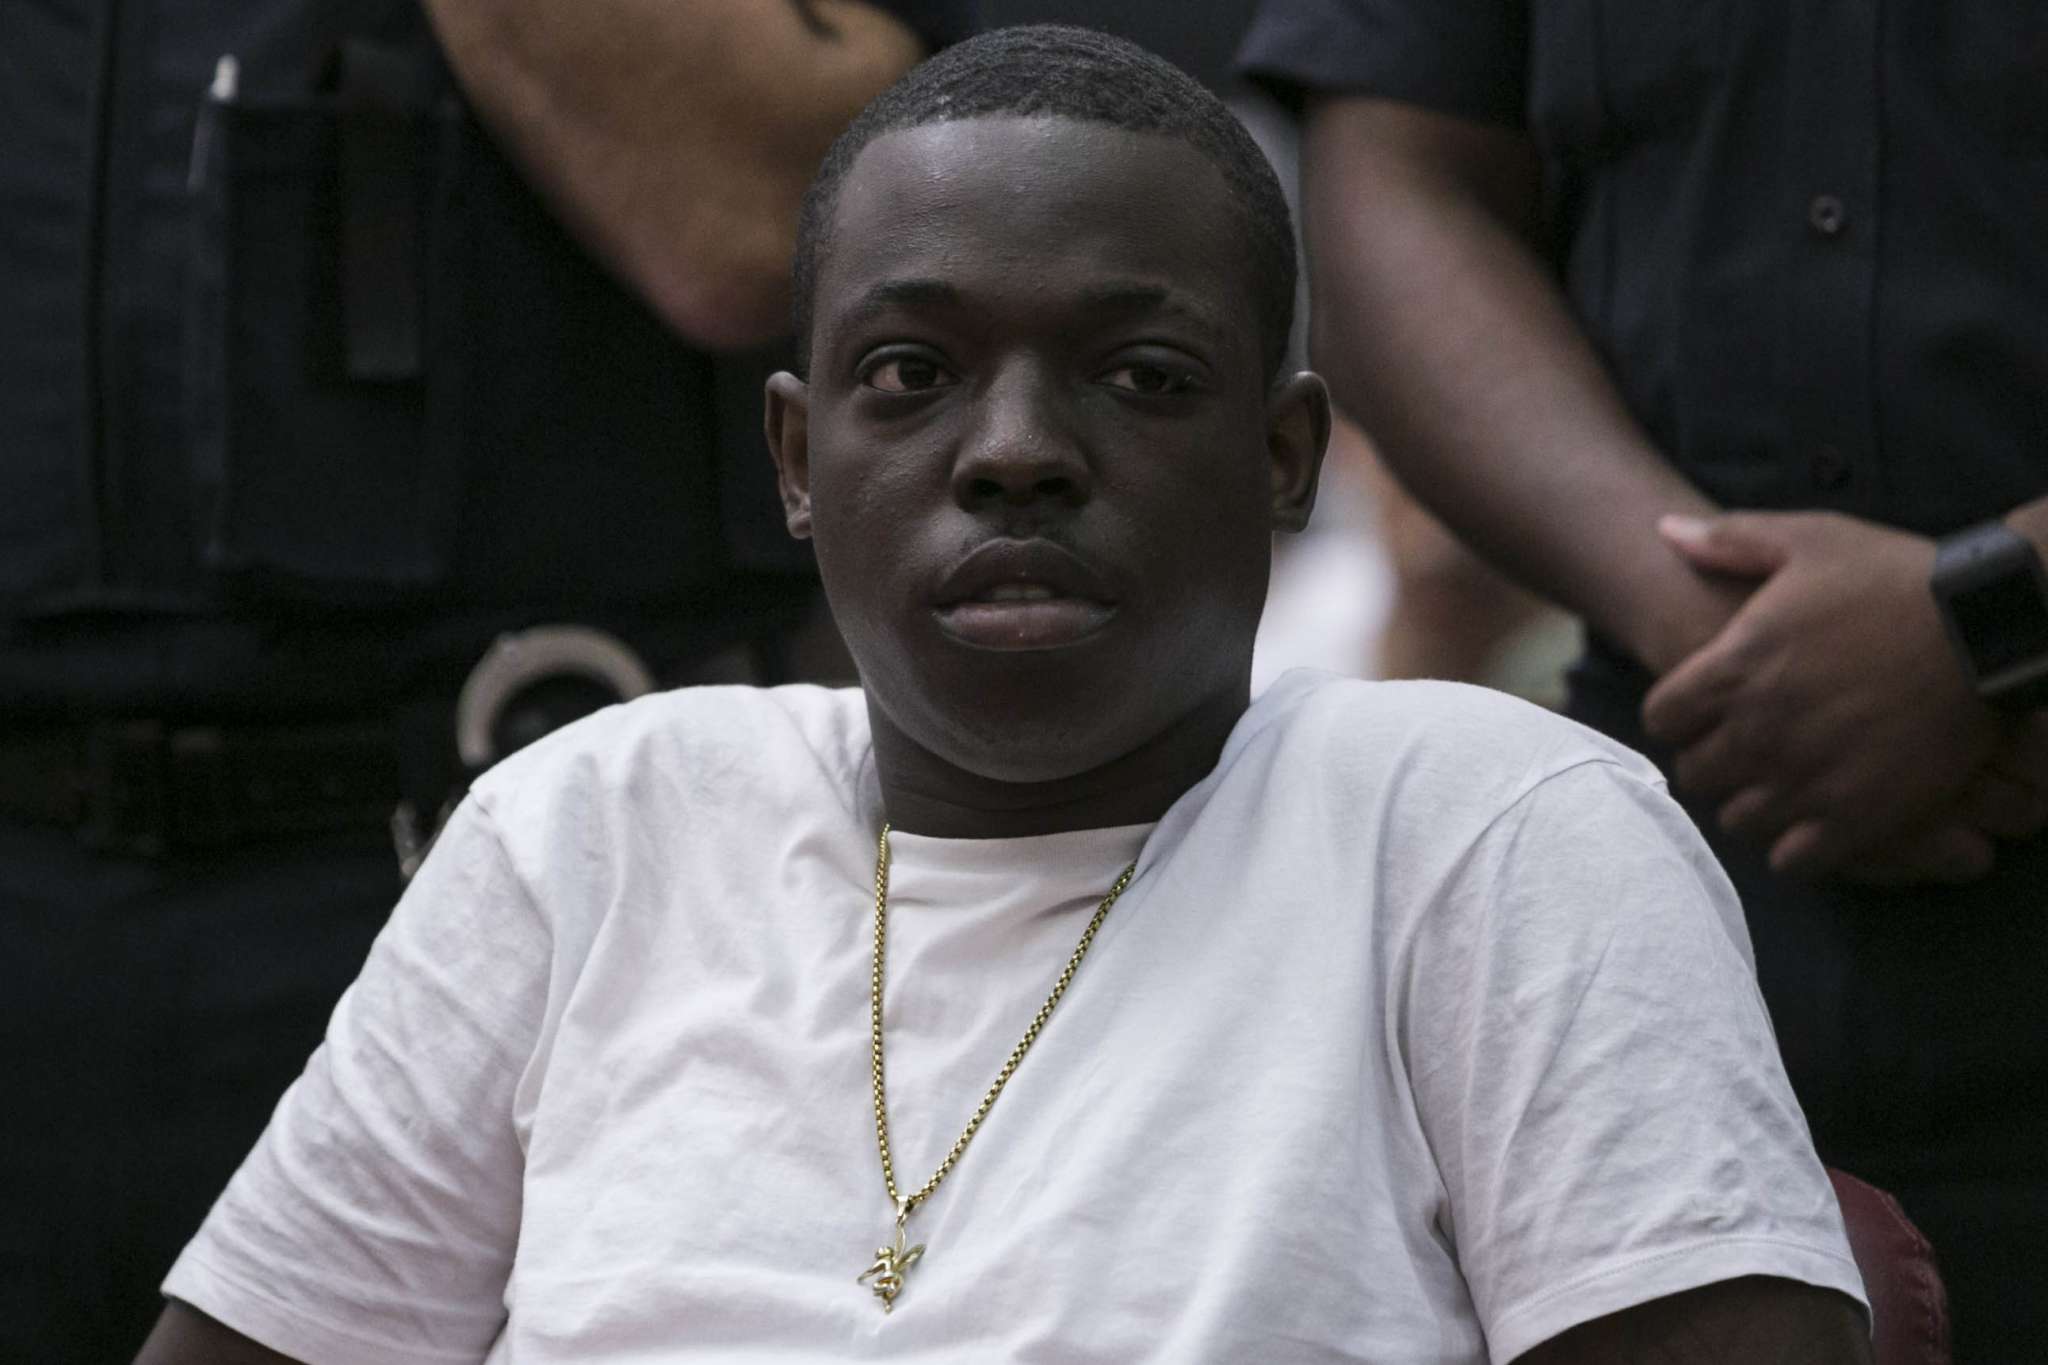 bobby-shmurda-addresses-dreams-that-some-people-never-chased